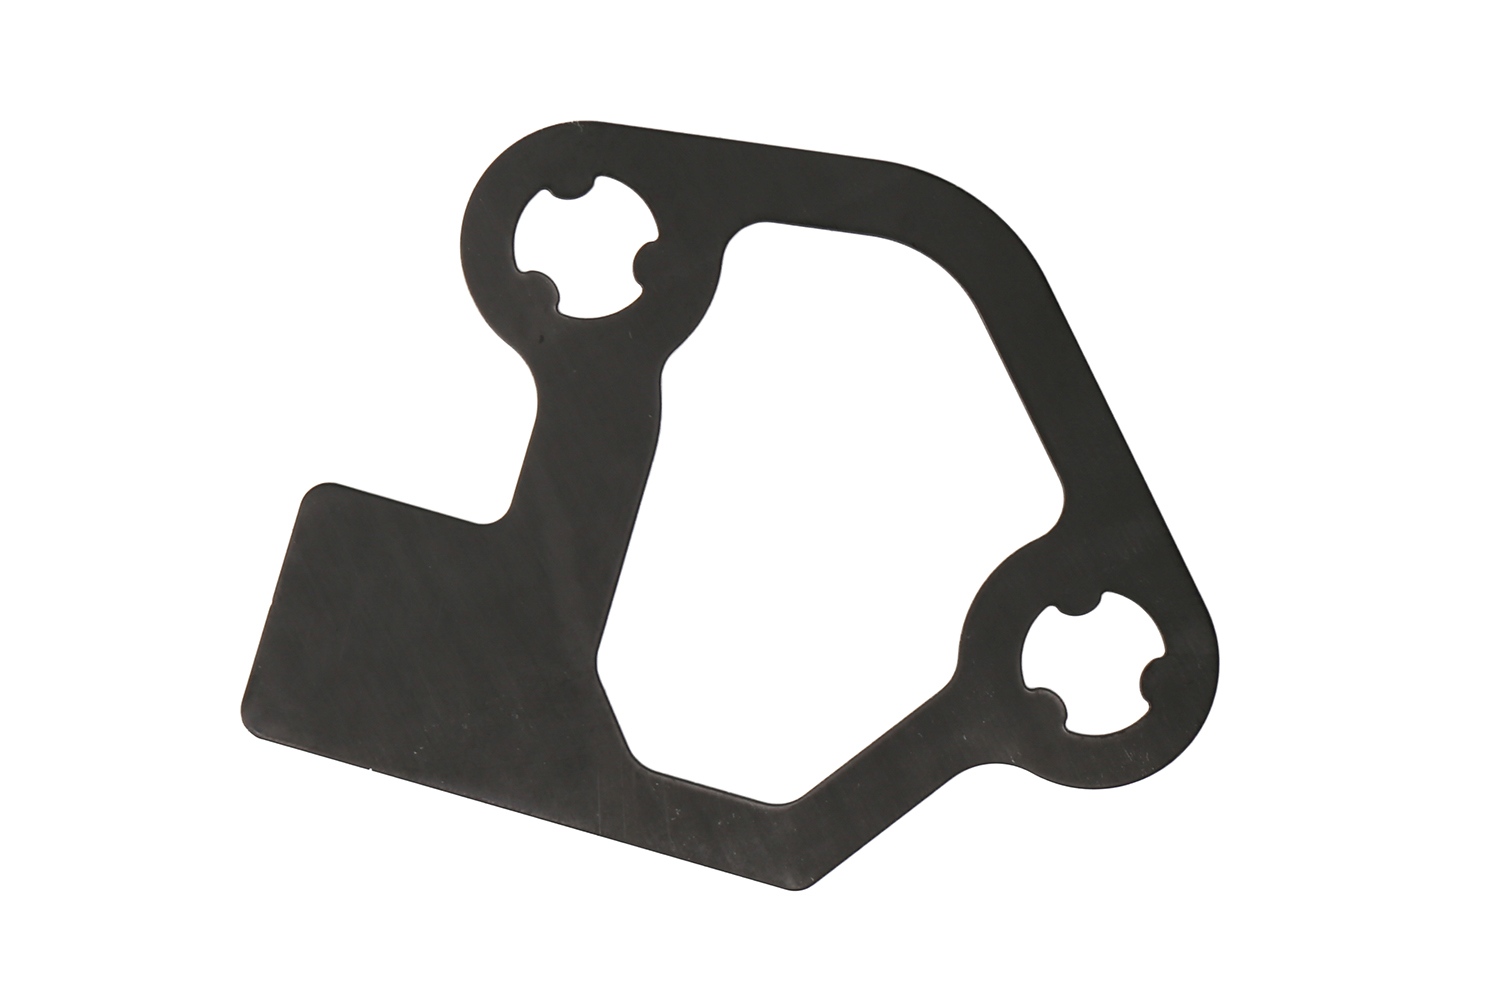 GM GENUINE PARTS - Engine Timing Chain Tensioner Gasket - GMP 12589477